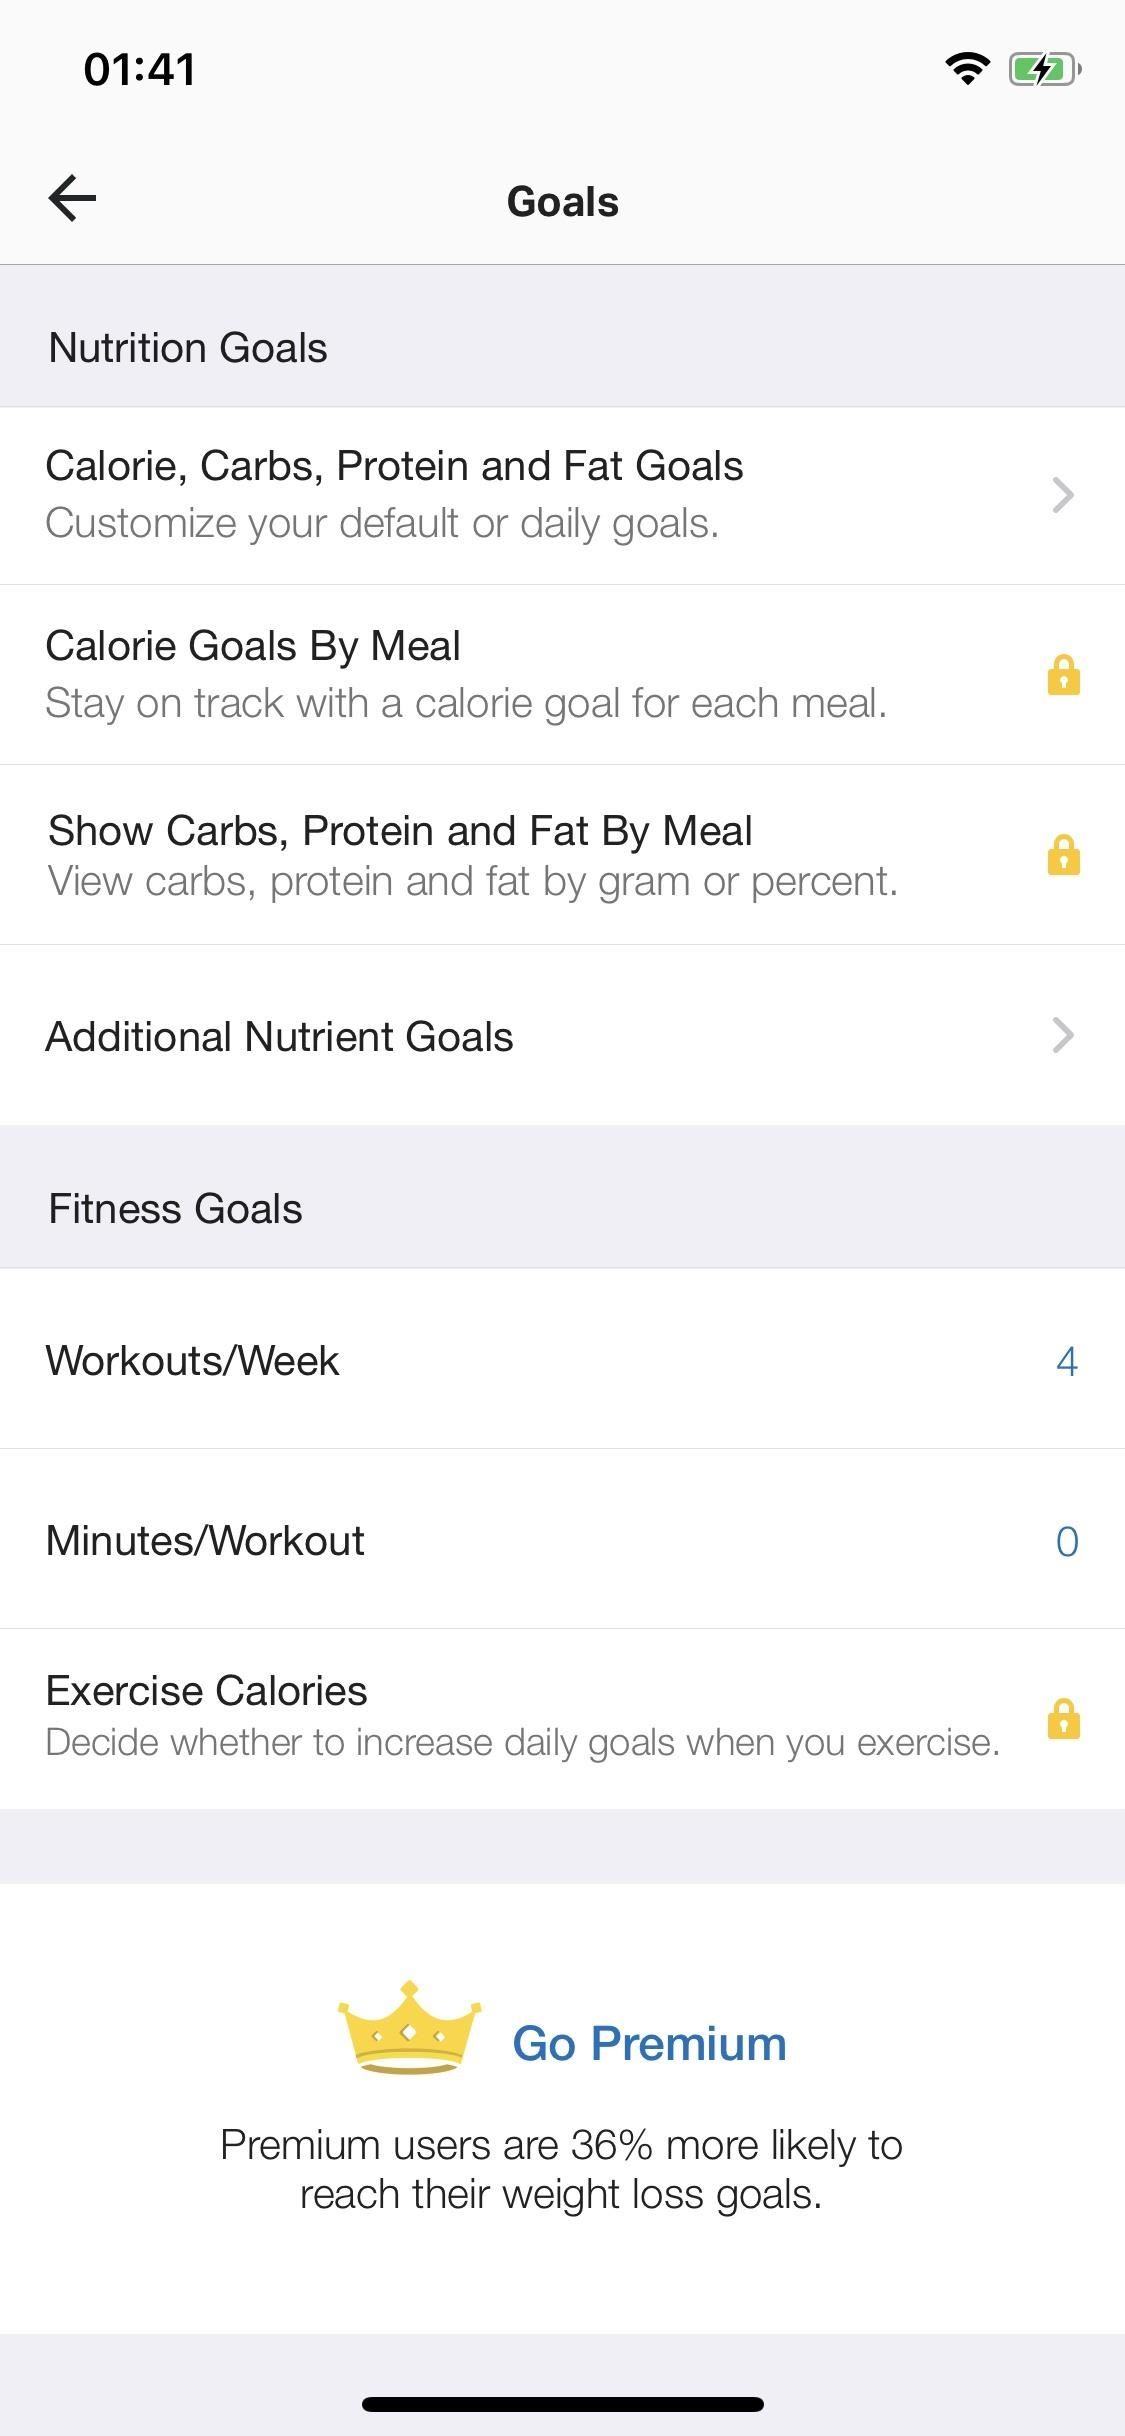 How to Customize Your Weekly & Daily Goals in MyFitnessPal